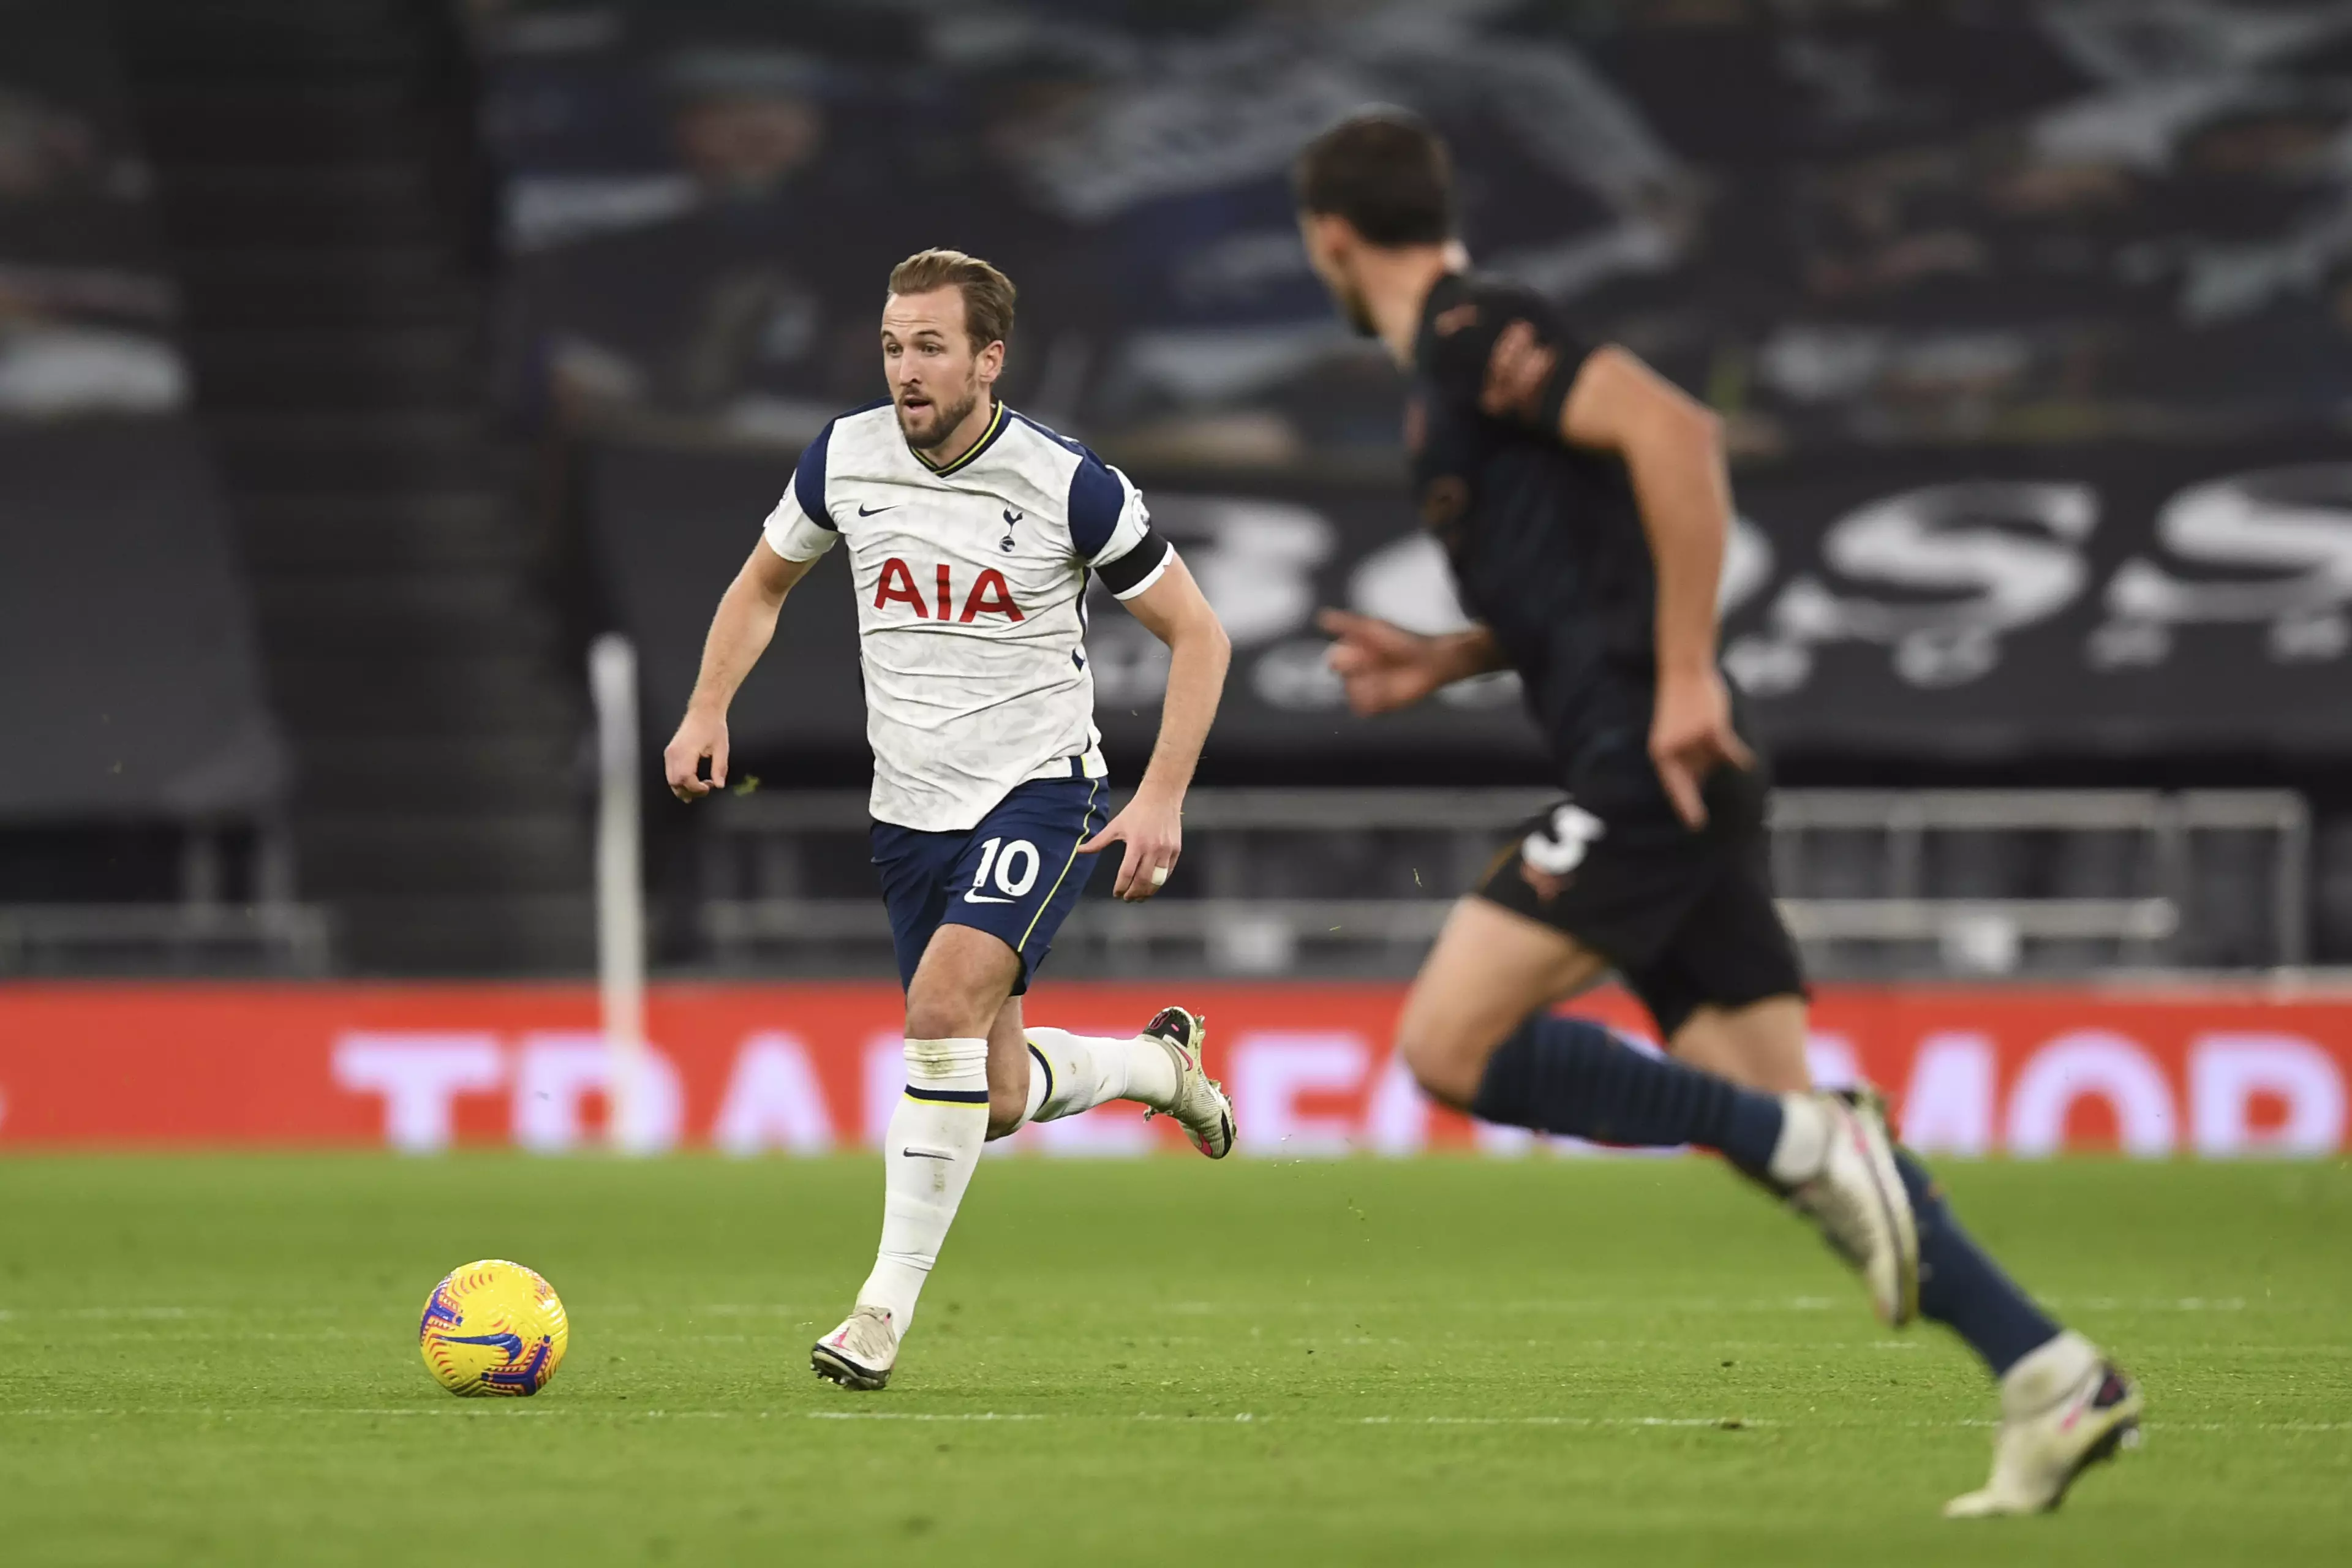 Kane didn't score at the weekend but ran the game for Spurs. Image: PA Images